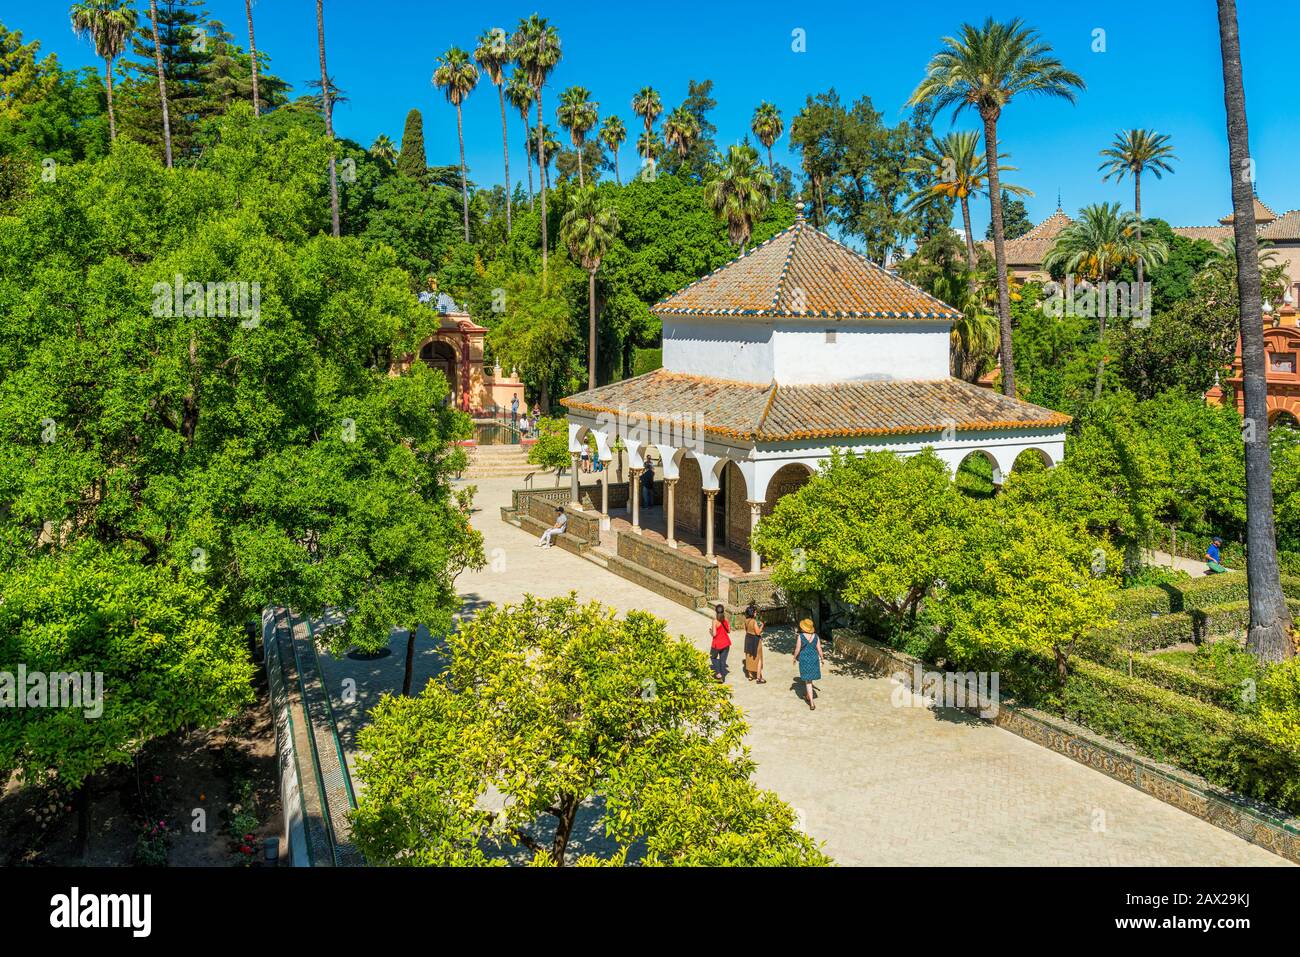 The idyllic garden in the Royal Alcazars of Seville, Andalusia, Spain. Stock Photo